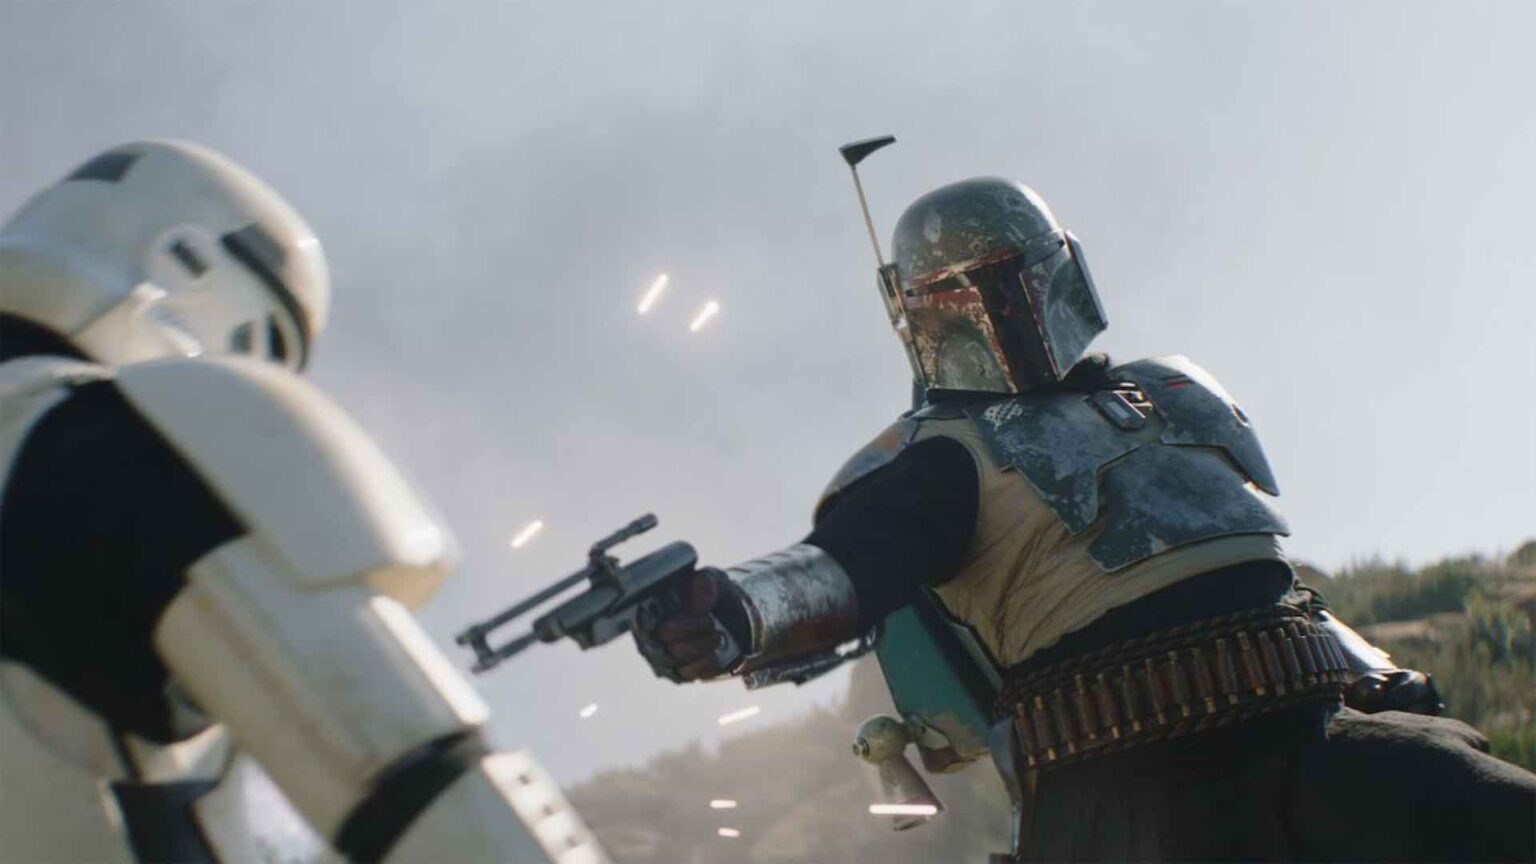 Boba Fett is getting his own 'Mandalorian' spinoff. What can fans expect from the infamous bounty hunter's own show? Read about all the details here.